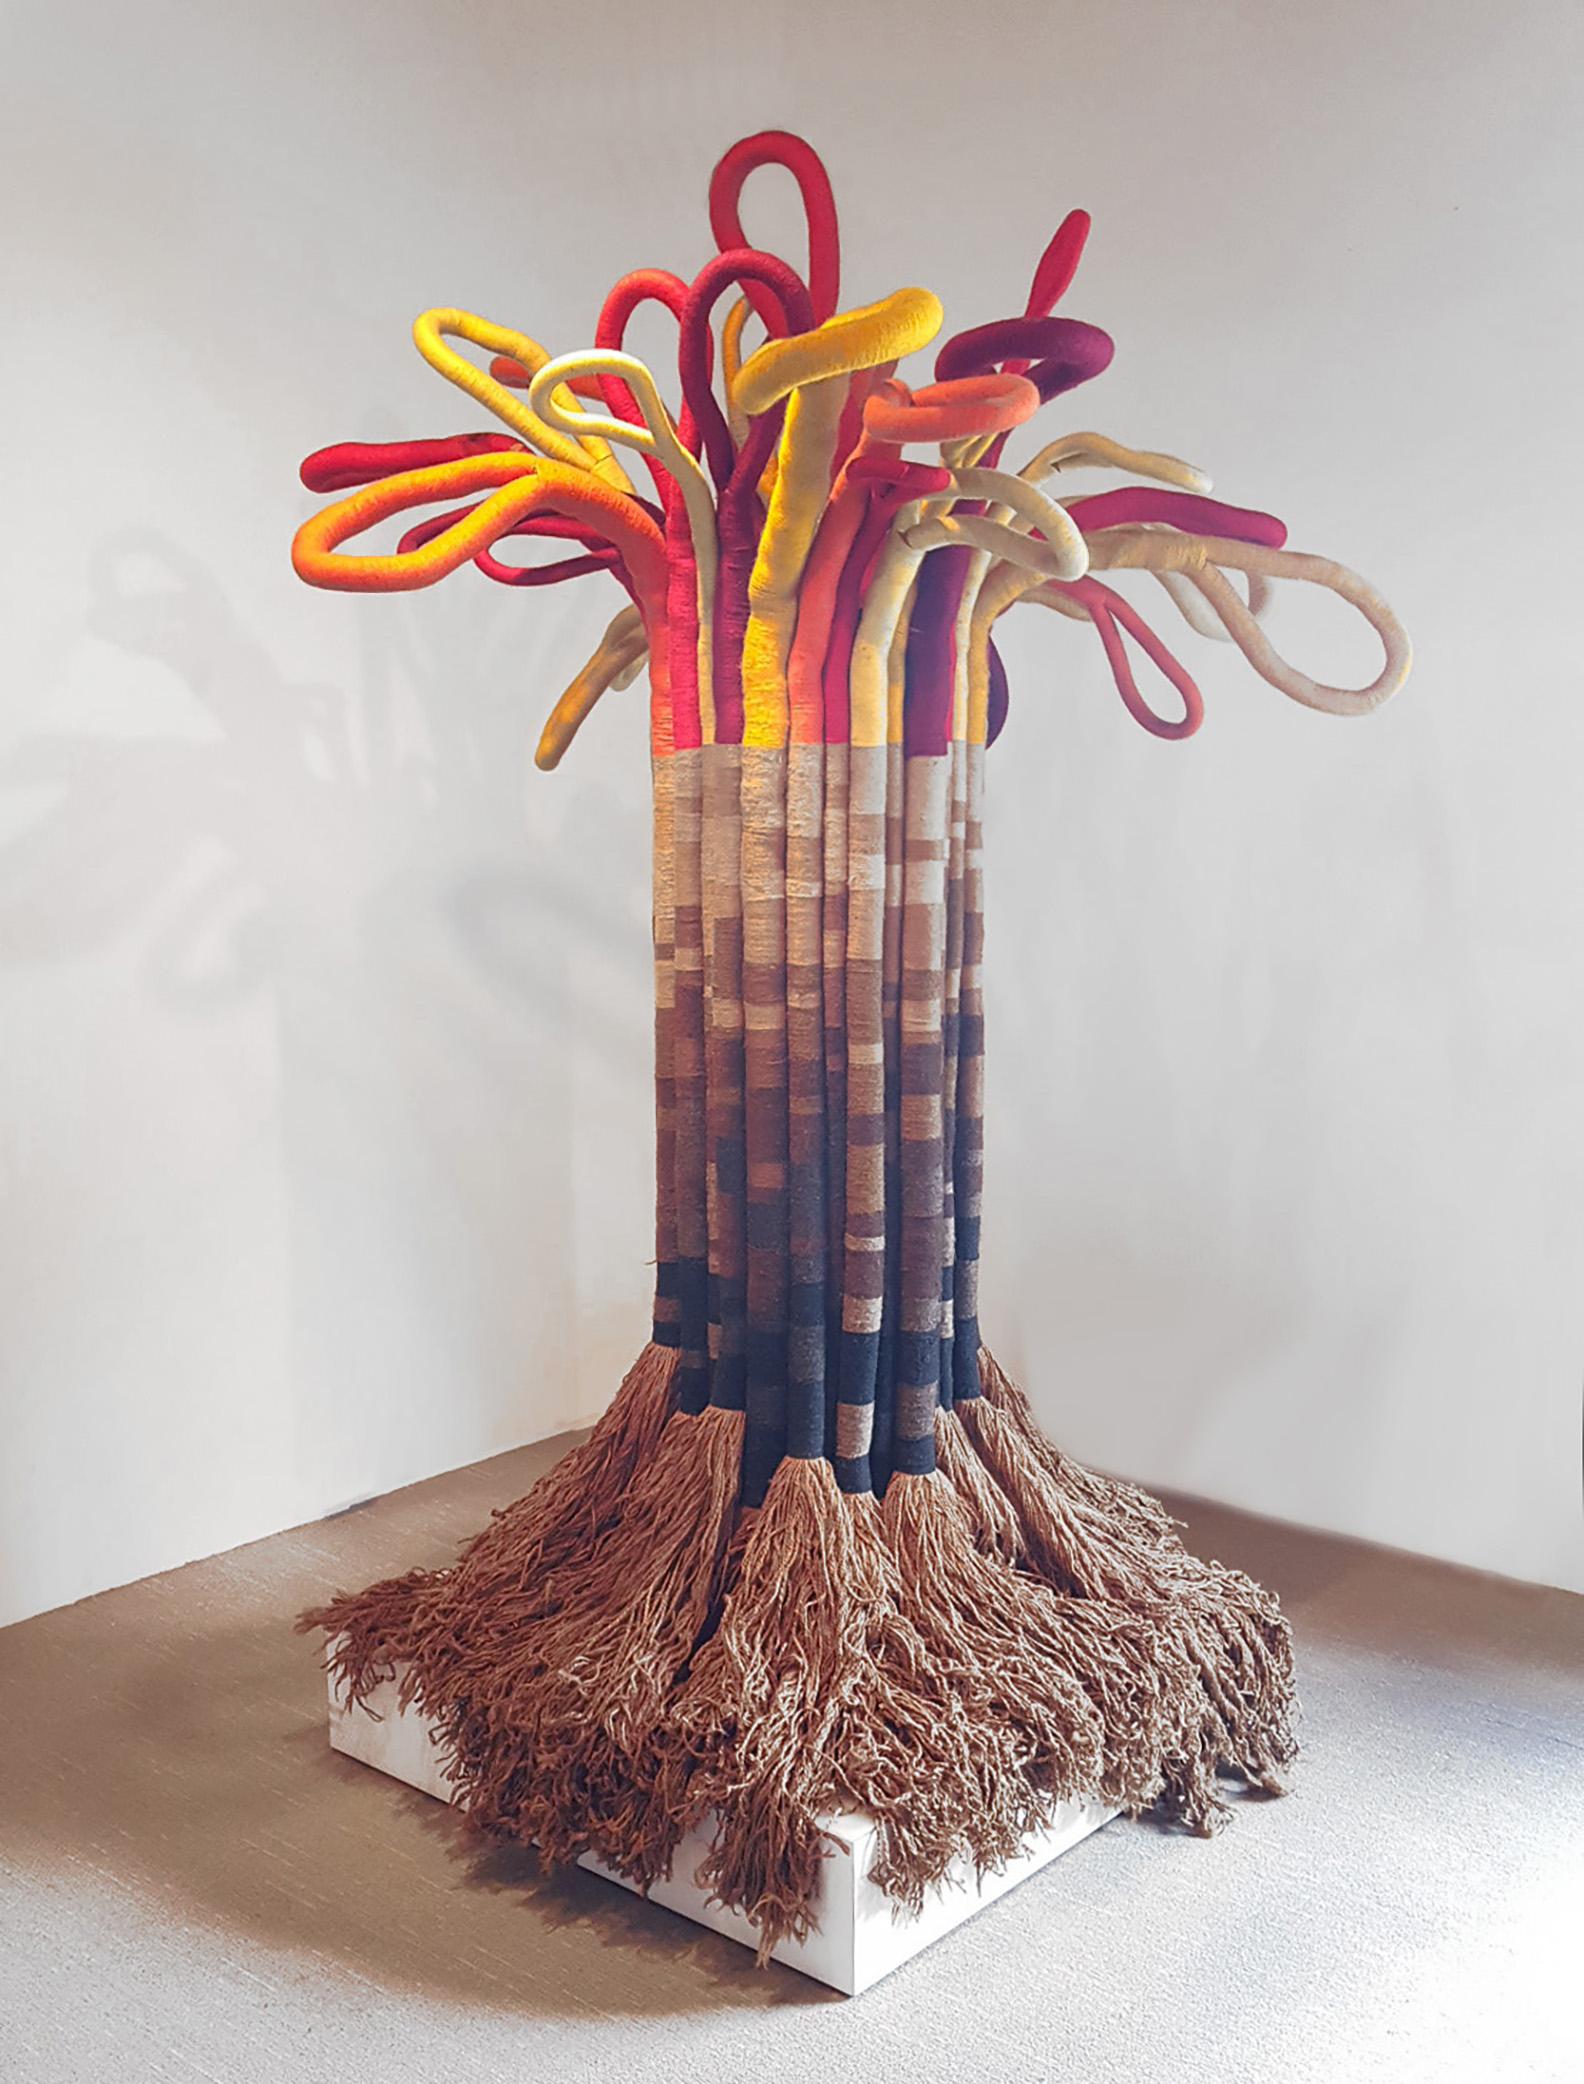 This large scale abstract fiber sculpture was created in the mid-1960s by renowned Detroit Artist, Jane Knight. This work was a part of her private collection and was never exhibited for sale. This piece is comprised of literal miles of jute strands